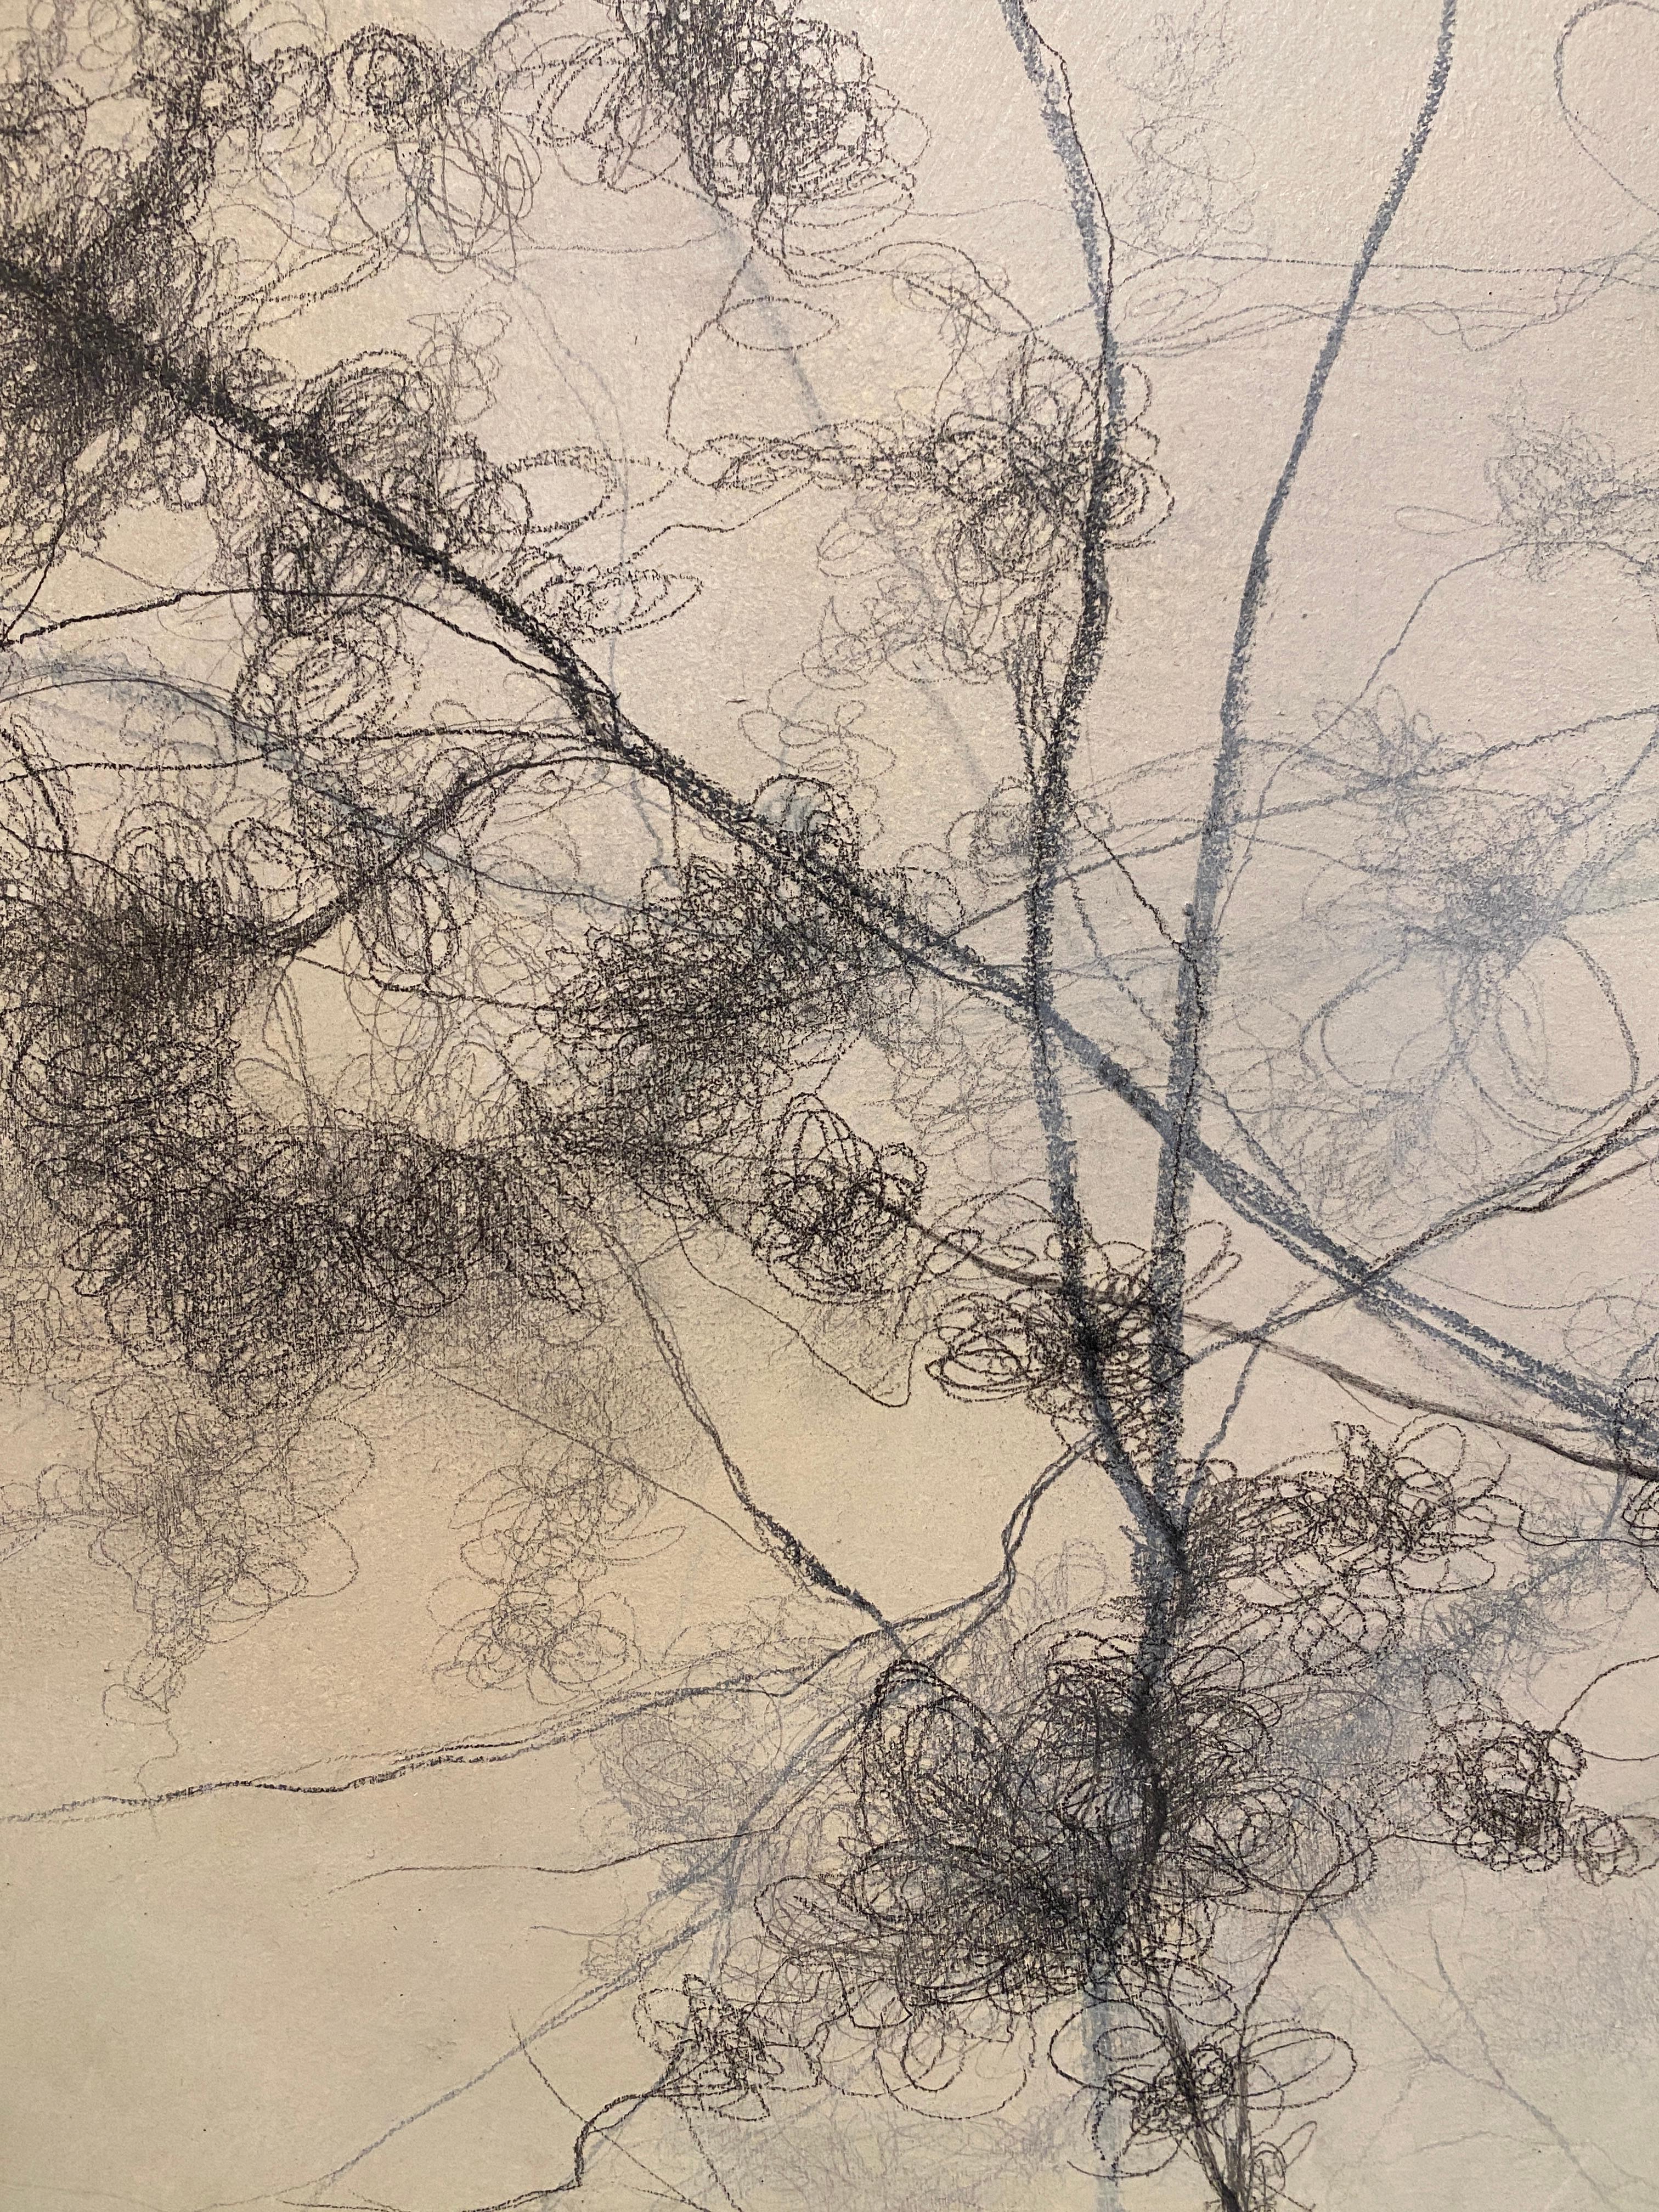 Entangled, abstract, contemporary, black and white, drawing, painting - Painting by Tania Dibbs